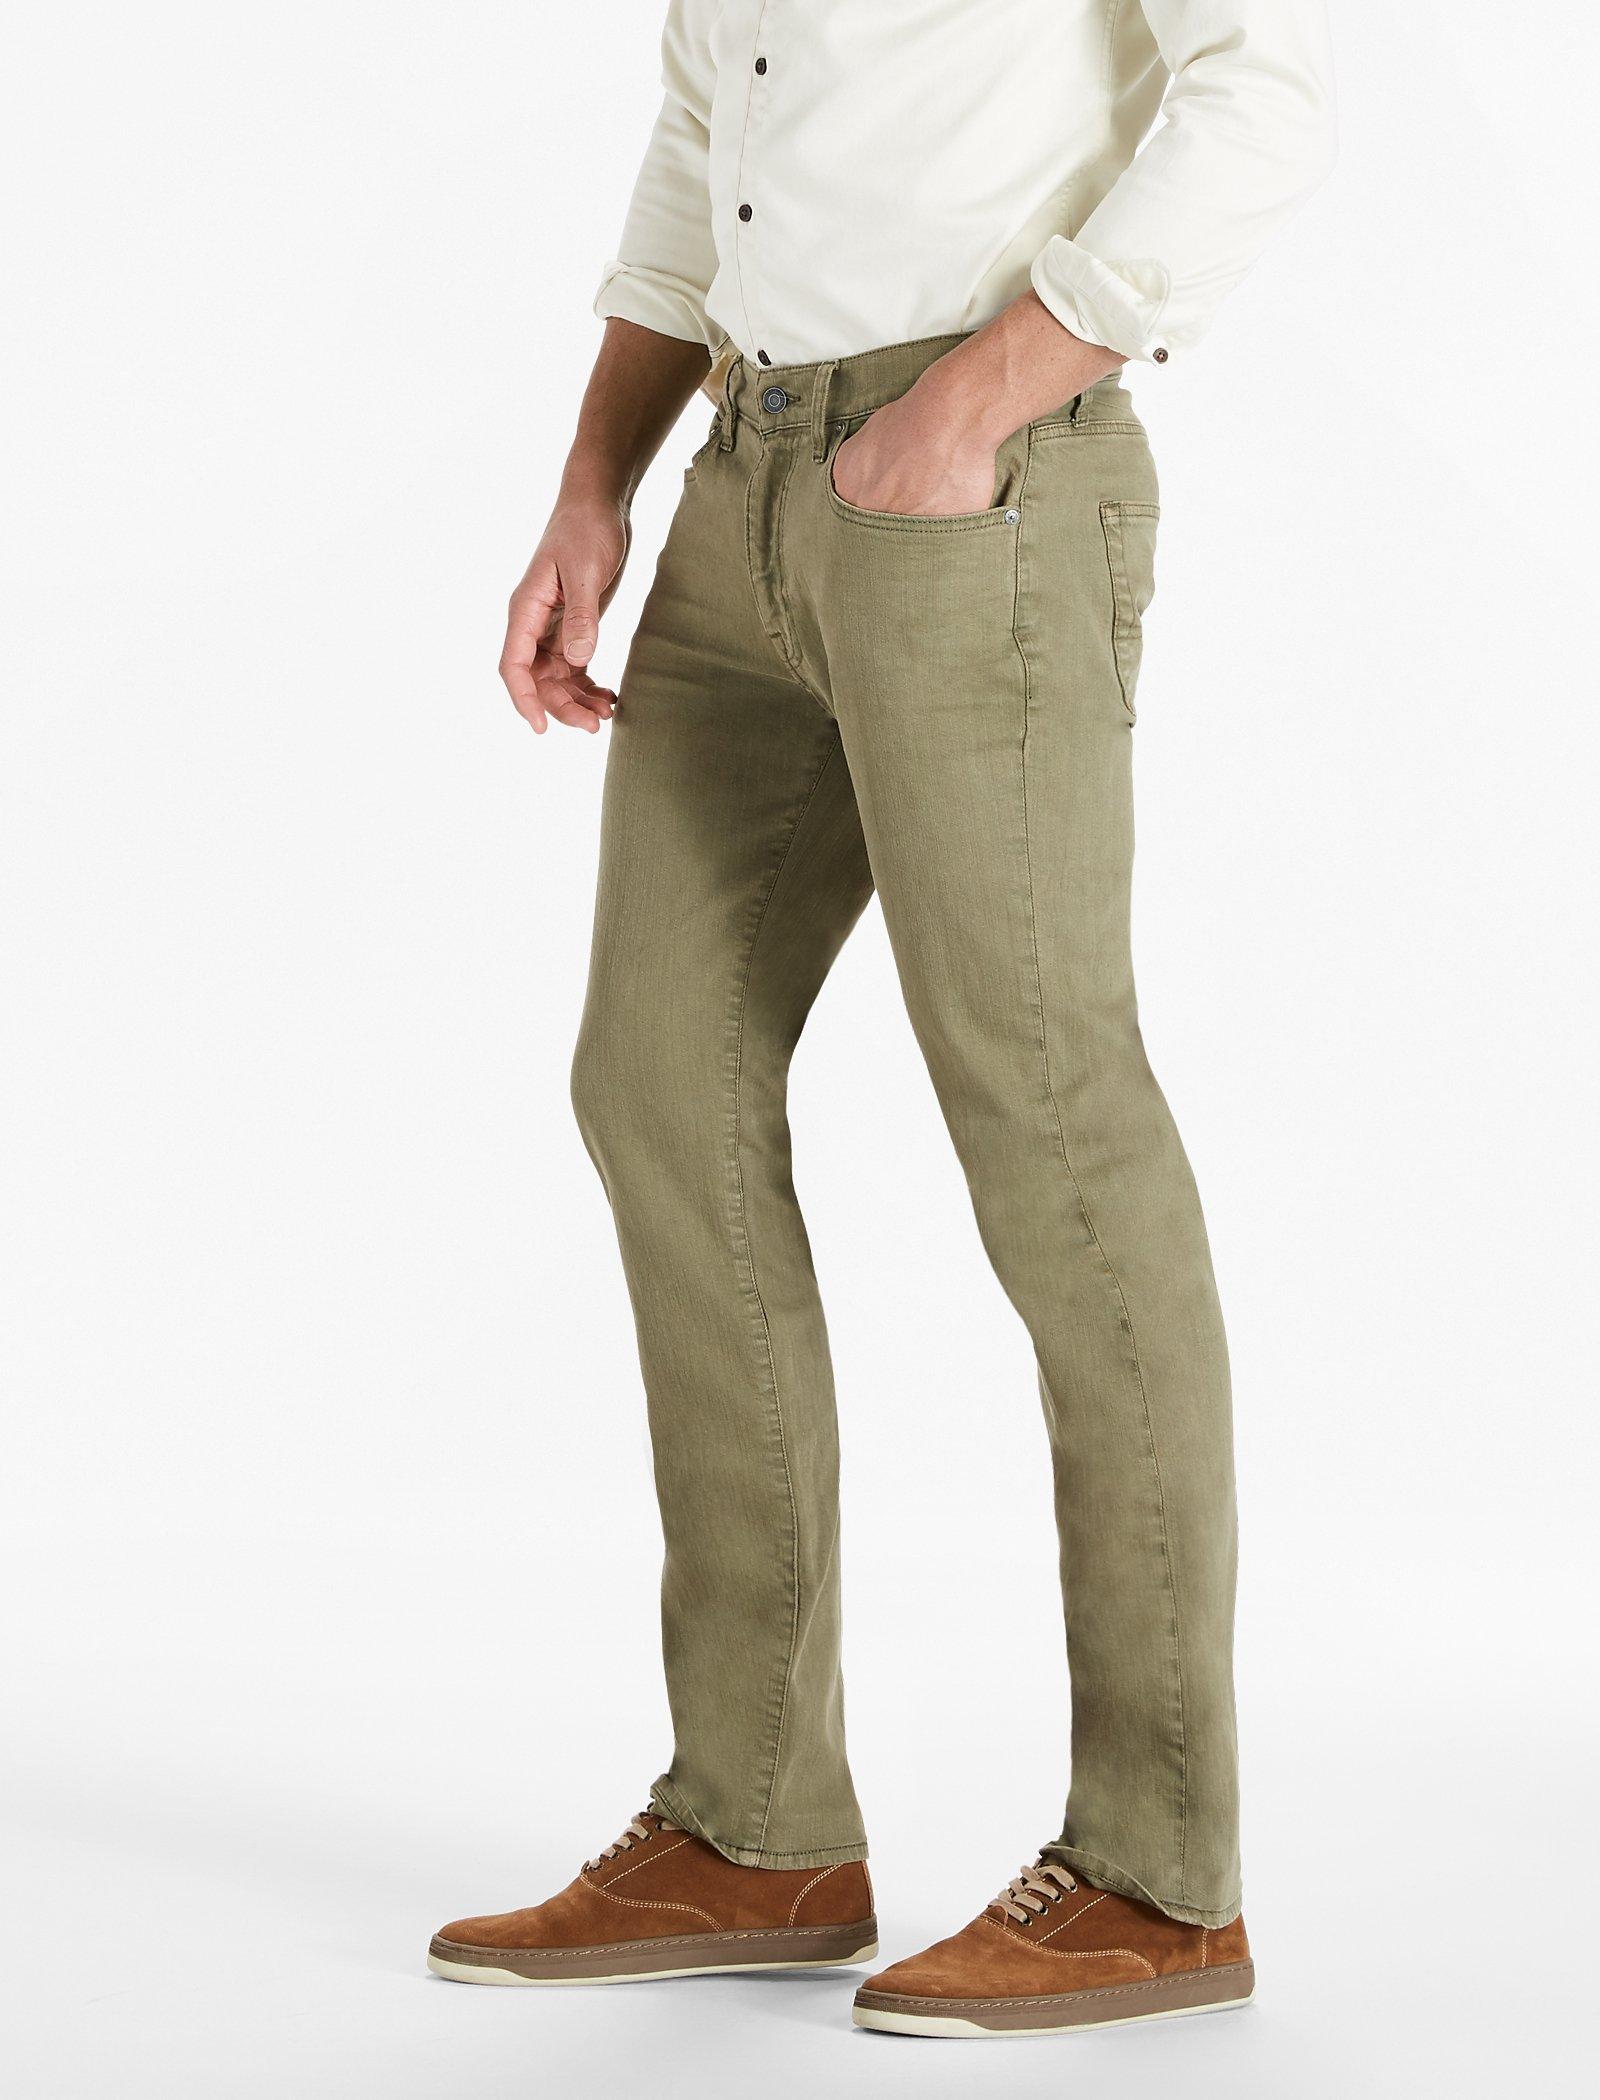 lucky brand athletic slim jeans